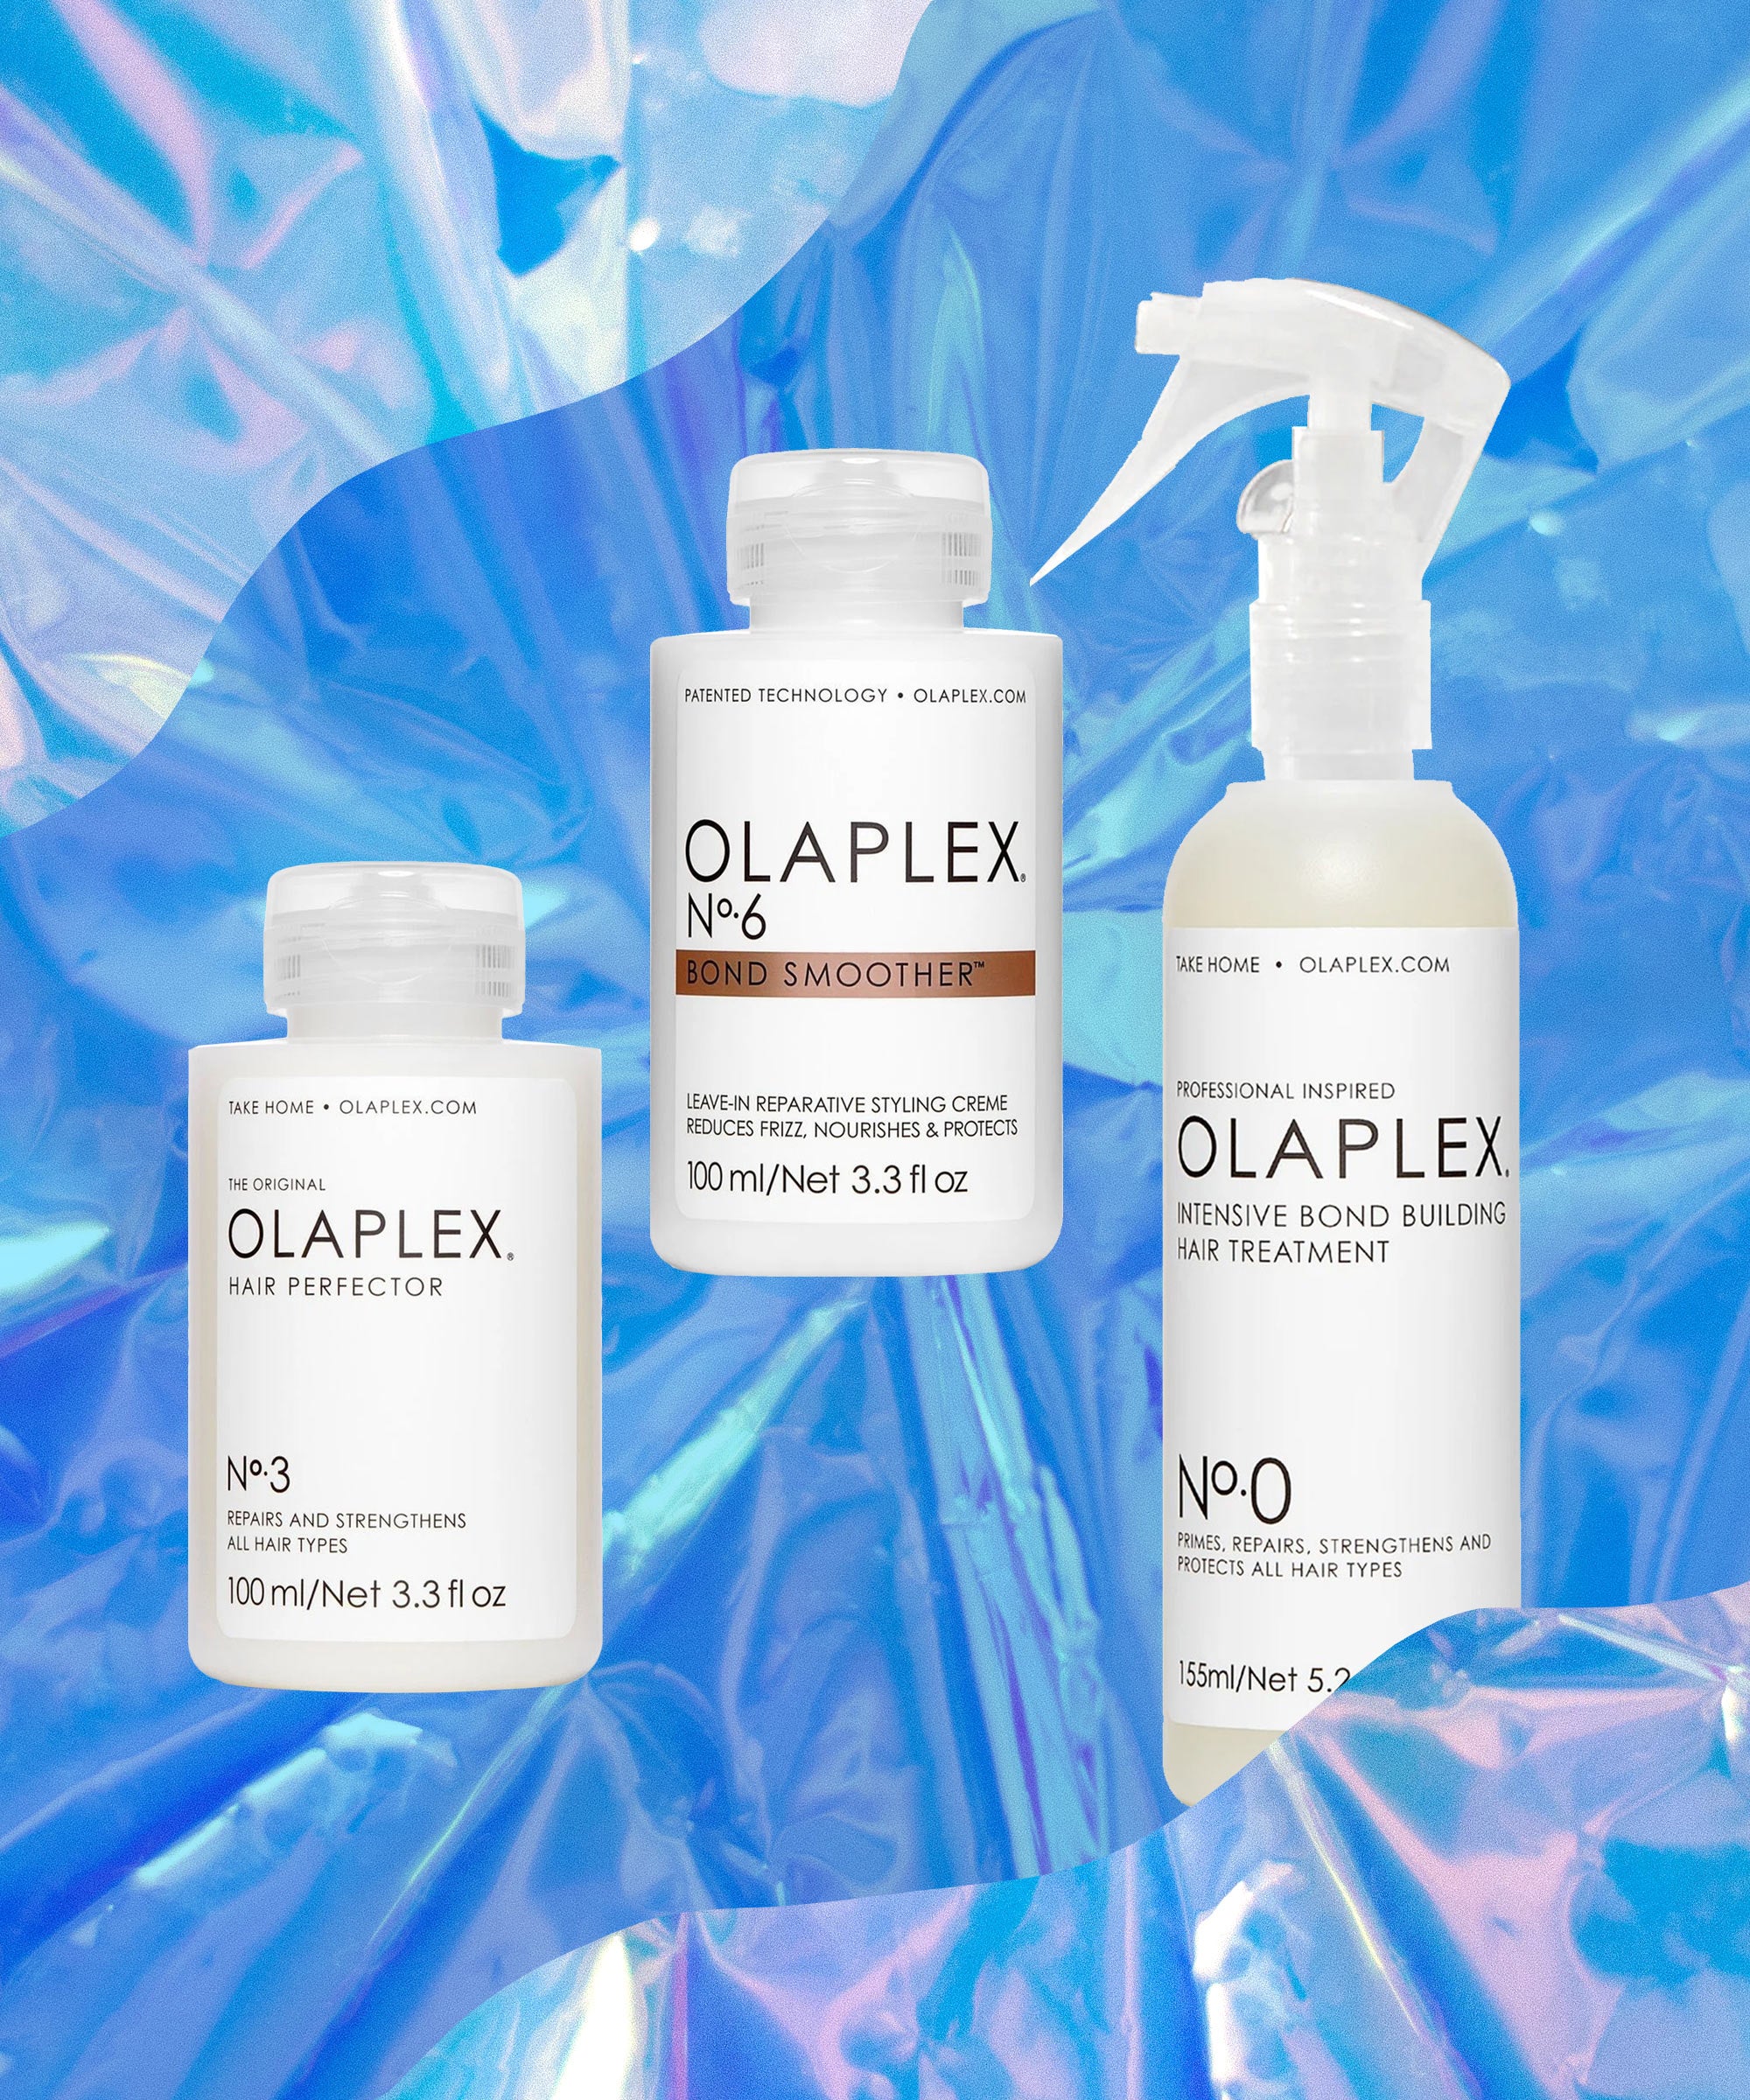 I The Full Olaplex Routine, Here My Thoughts